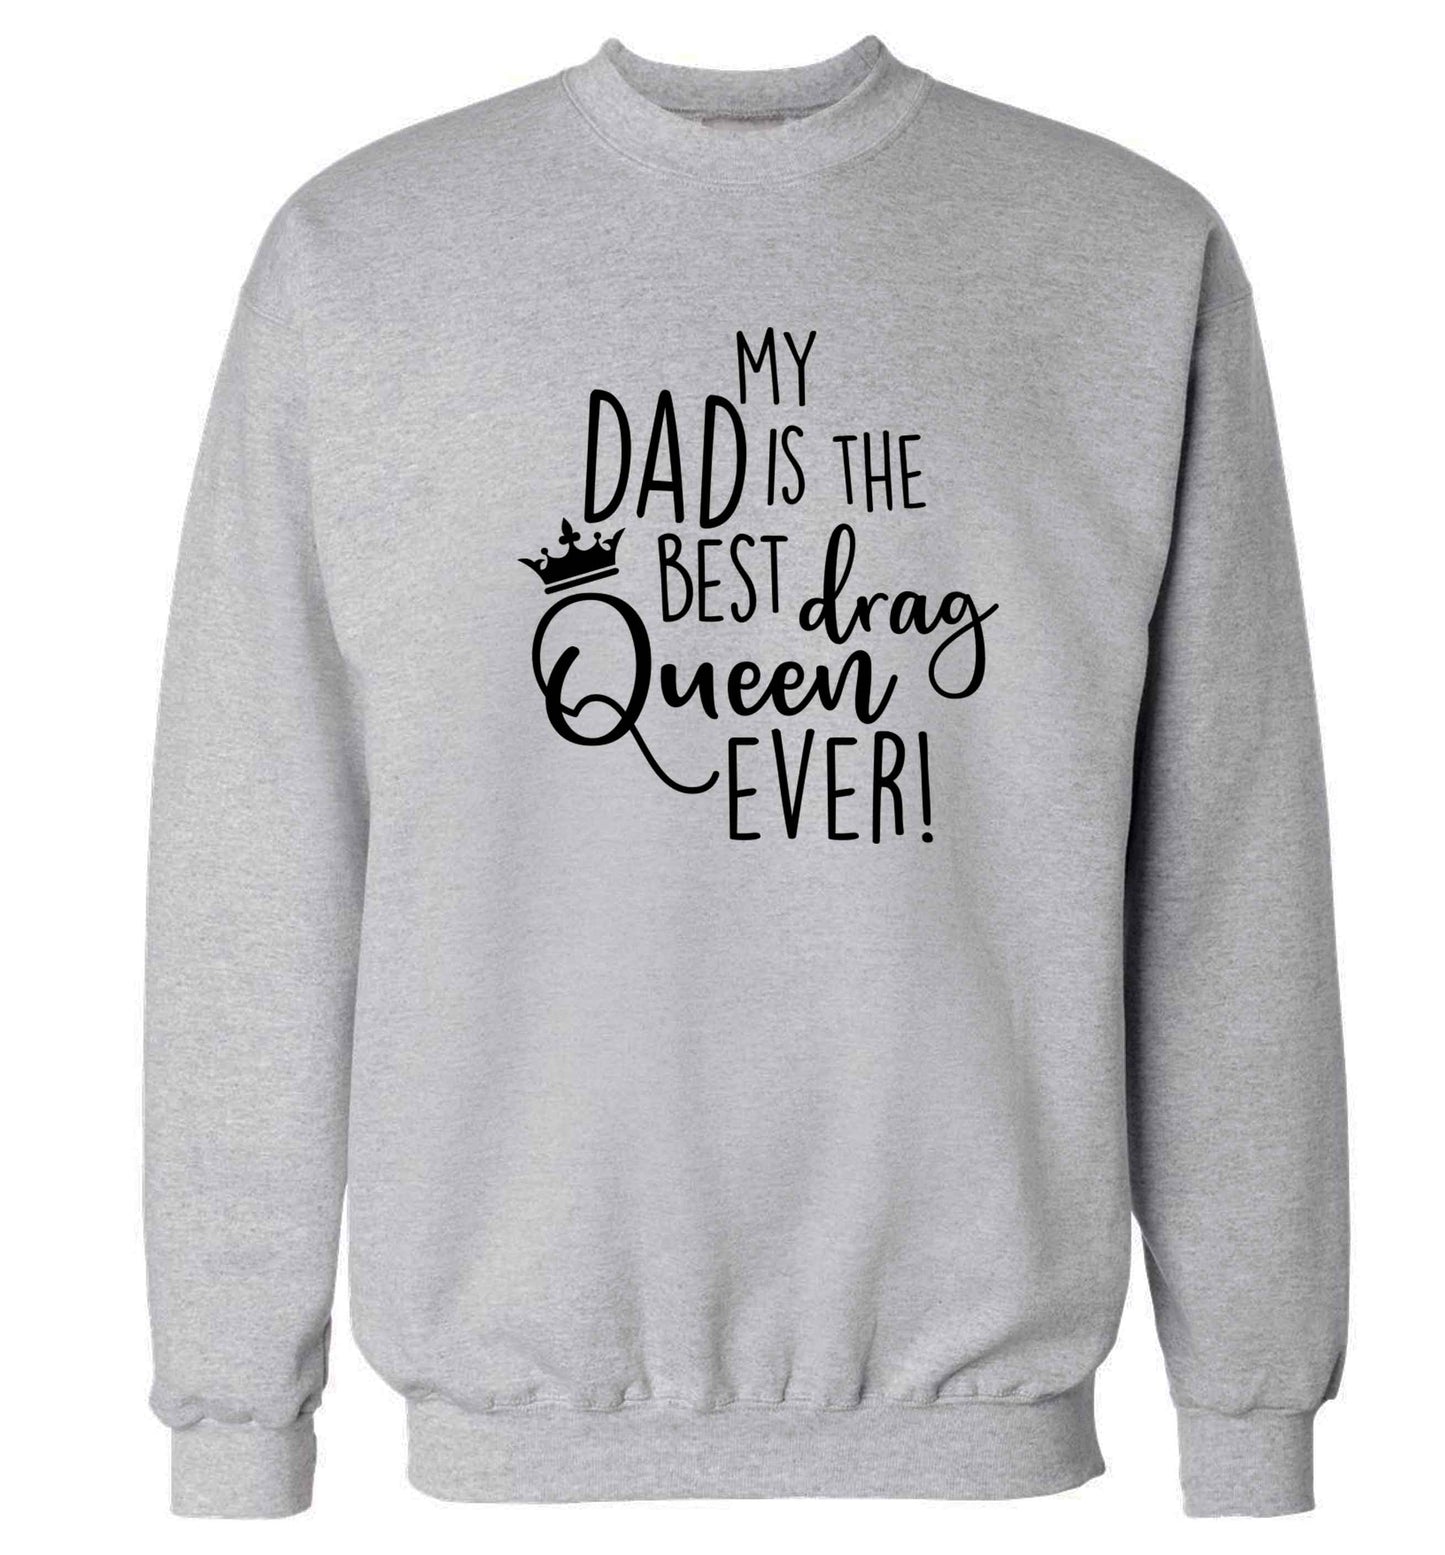 My dad is the best drag Queen ever Adult's unisex grey Sweater 2XL